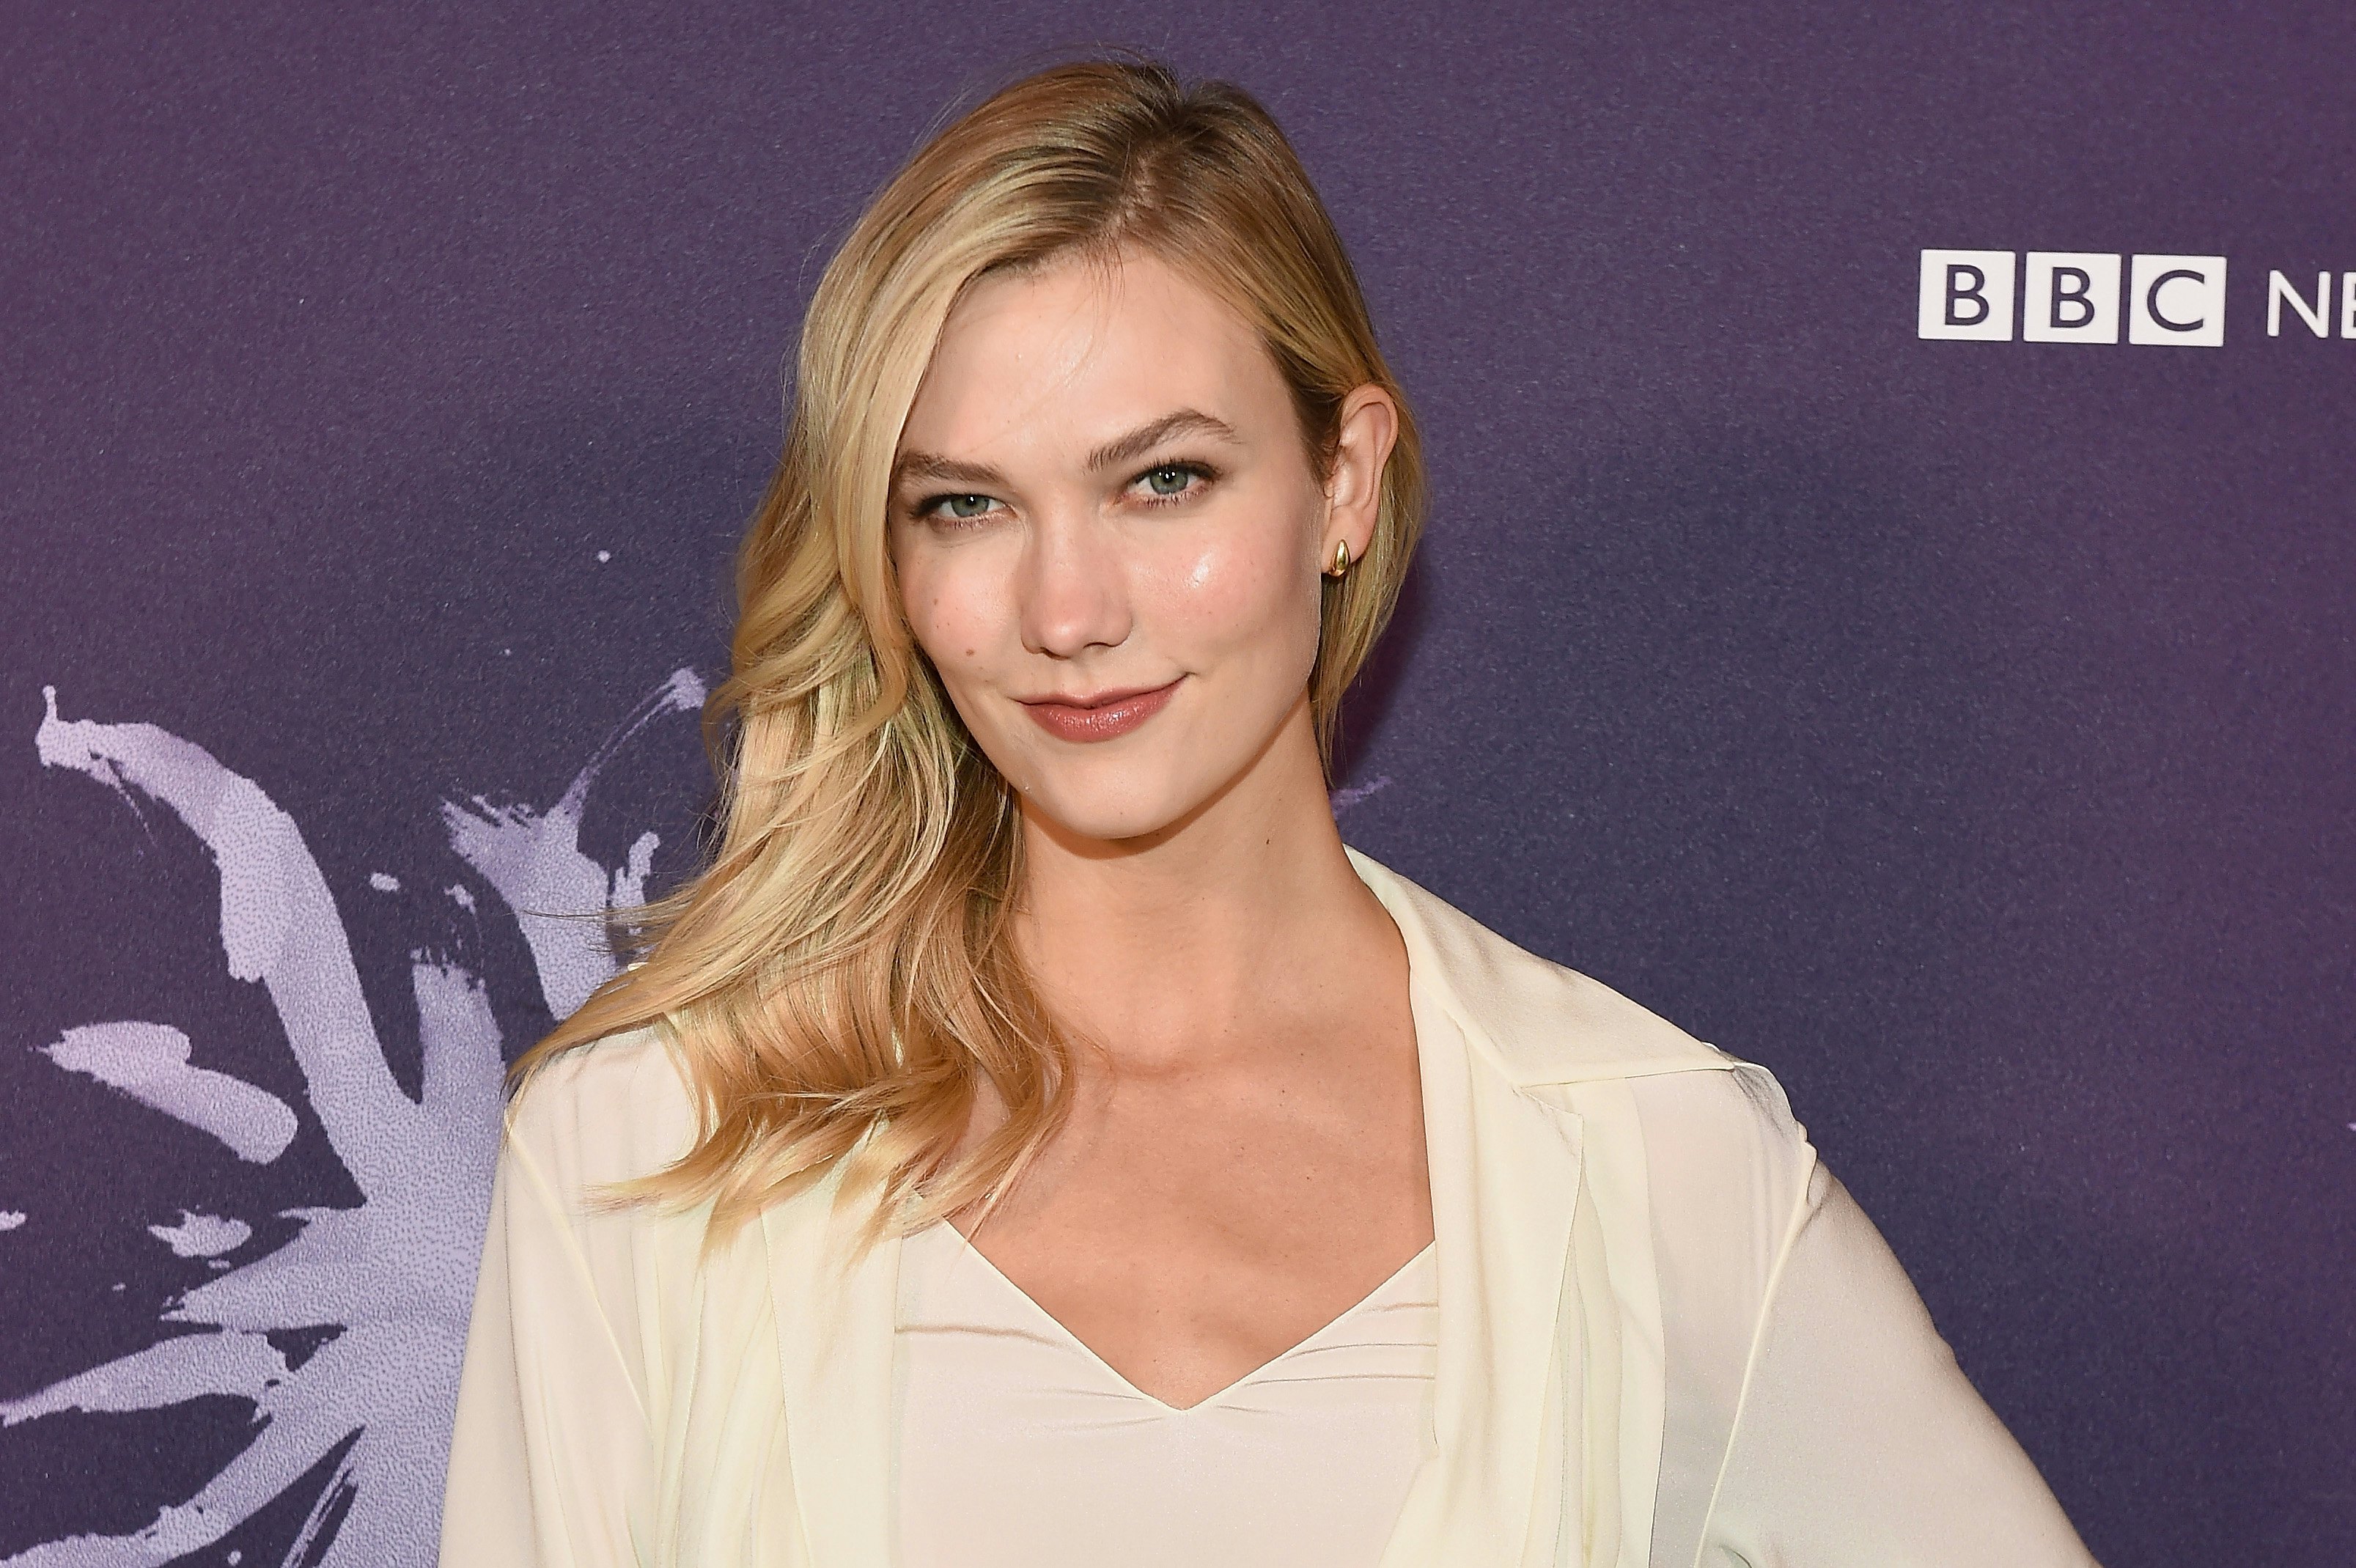 Karlie Kloss Lob Haircut Will Sway You To Get A Major Chop